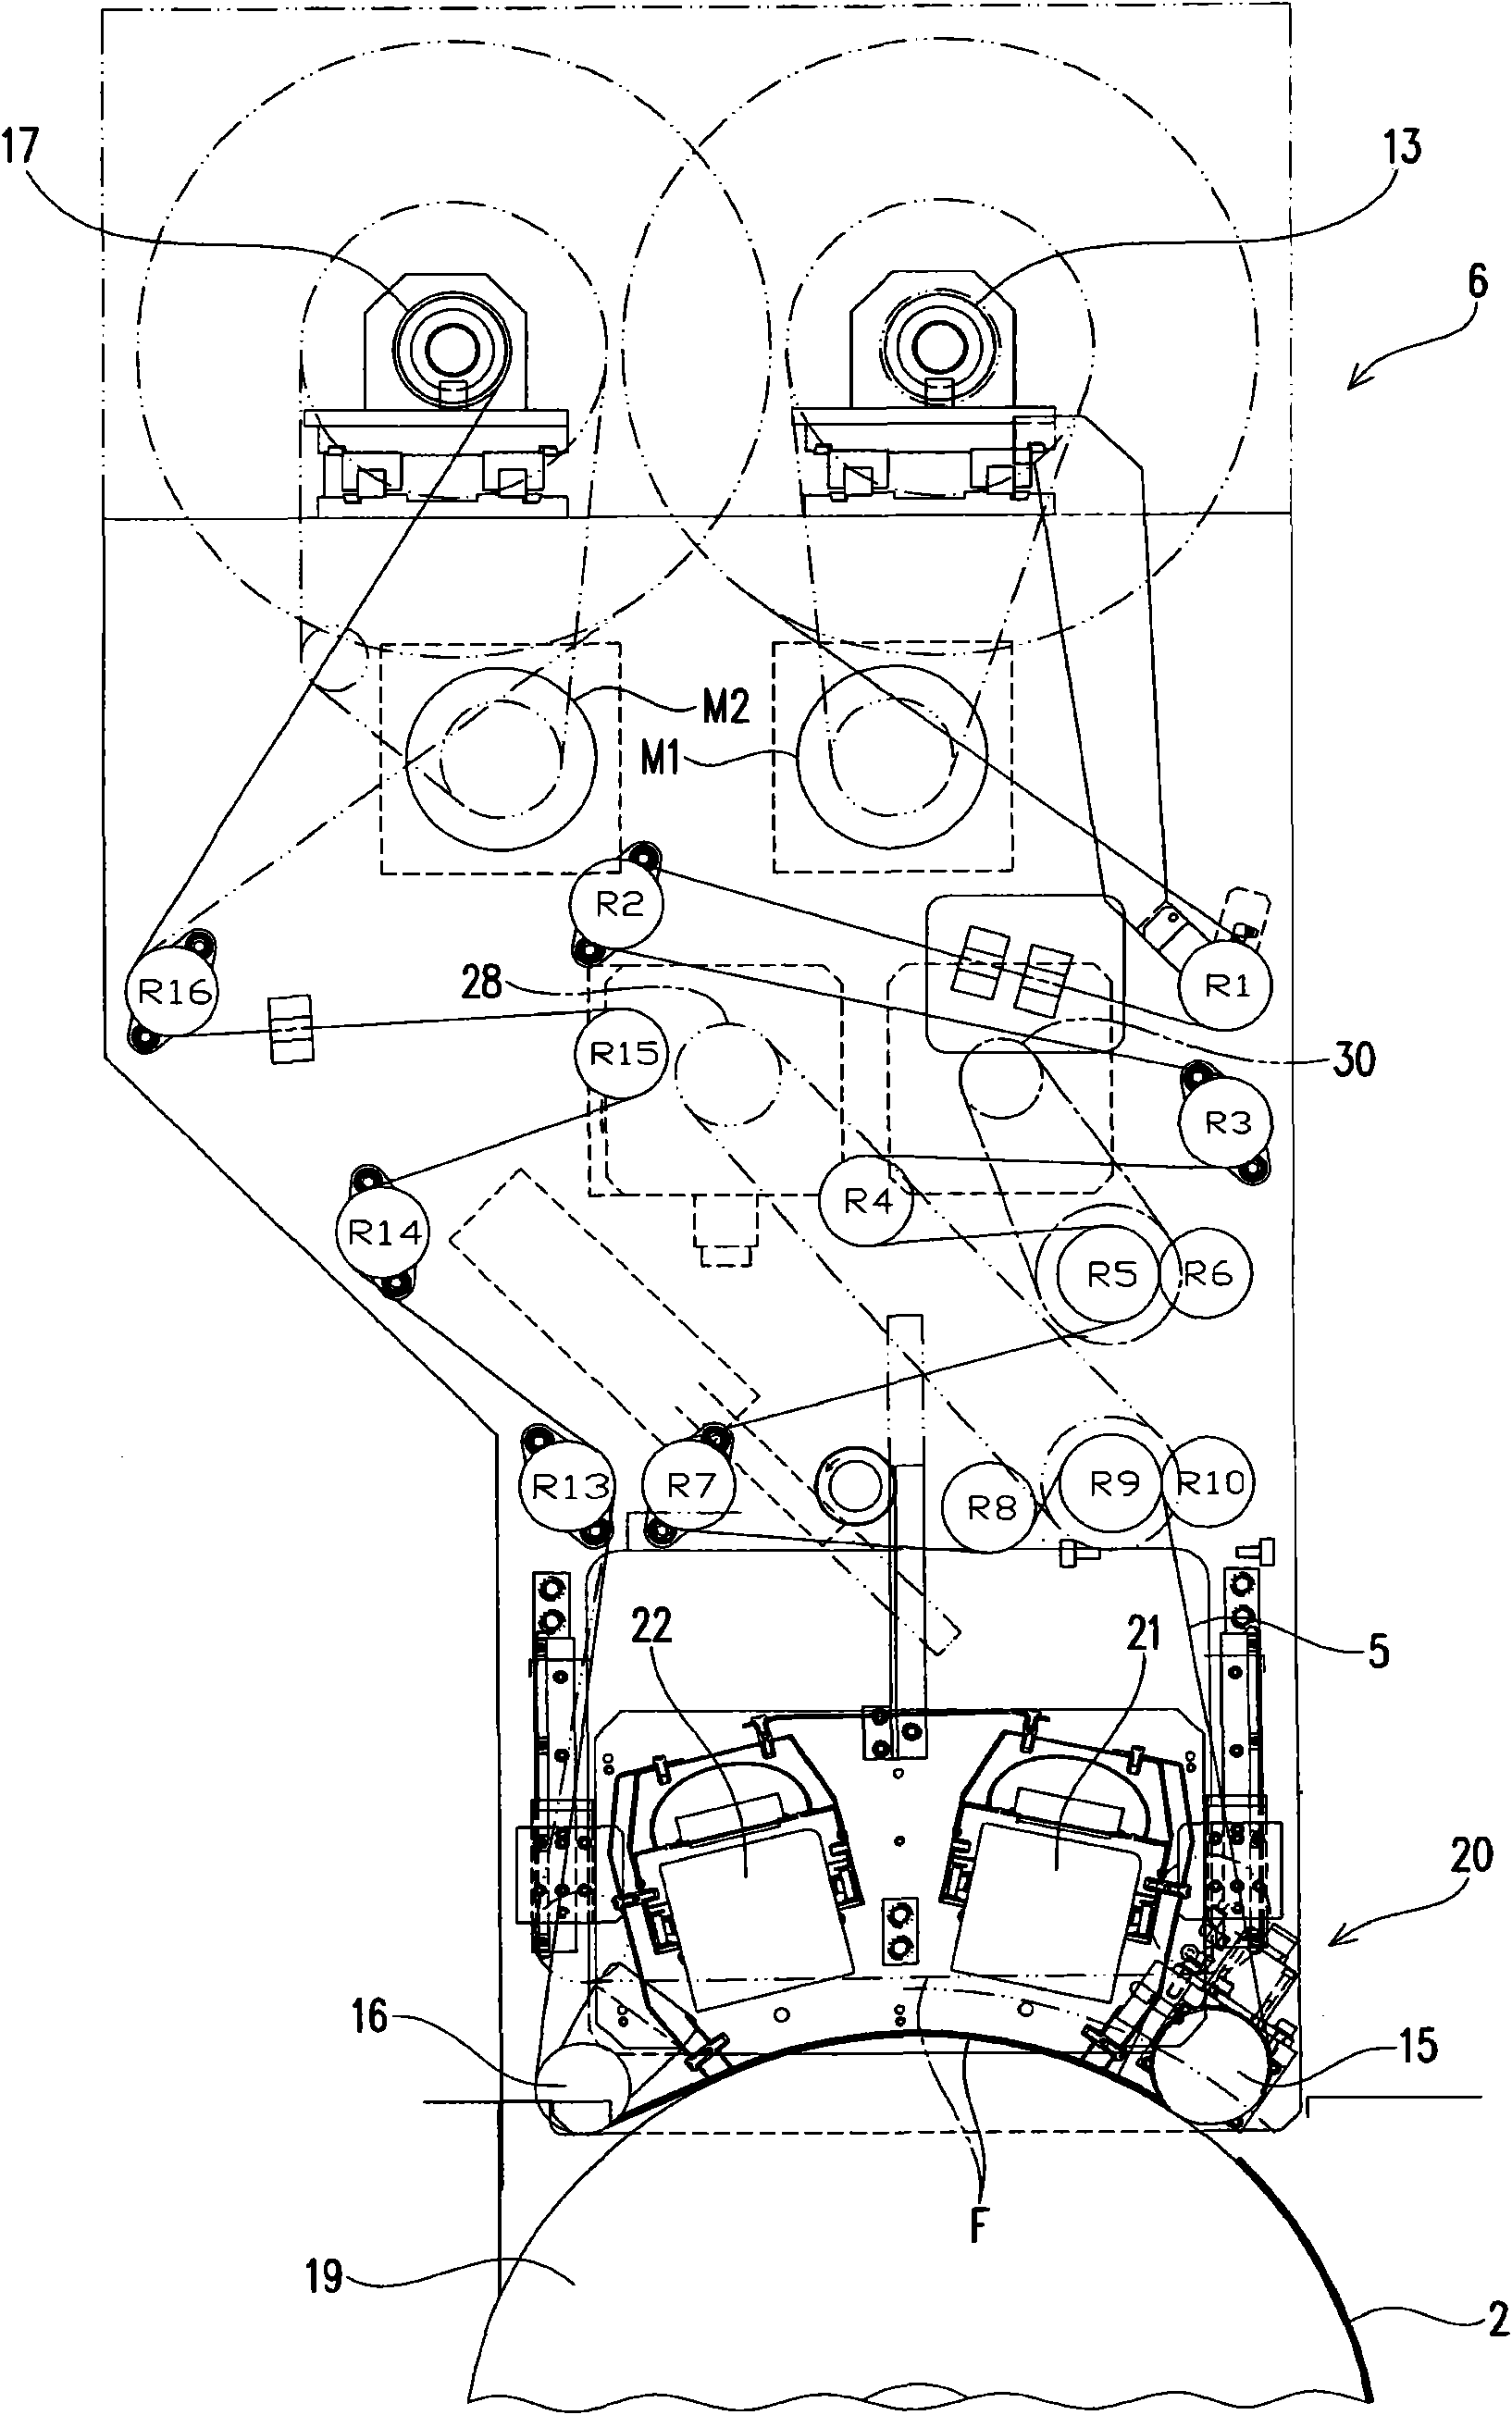 Transfer device and transfer method for printed sheets of paper